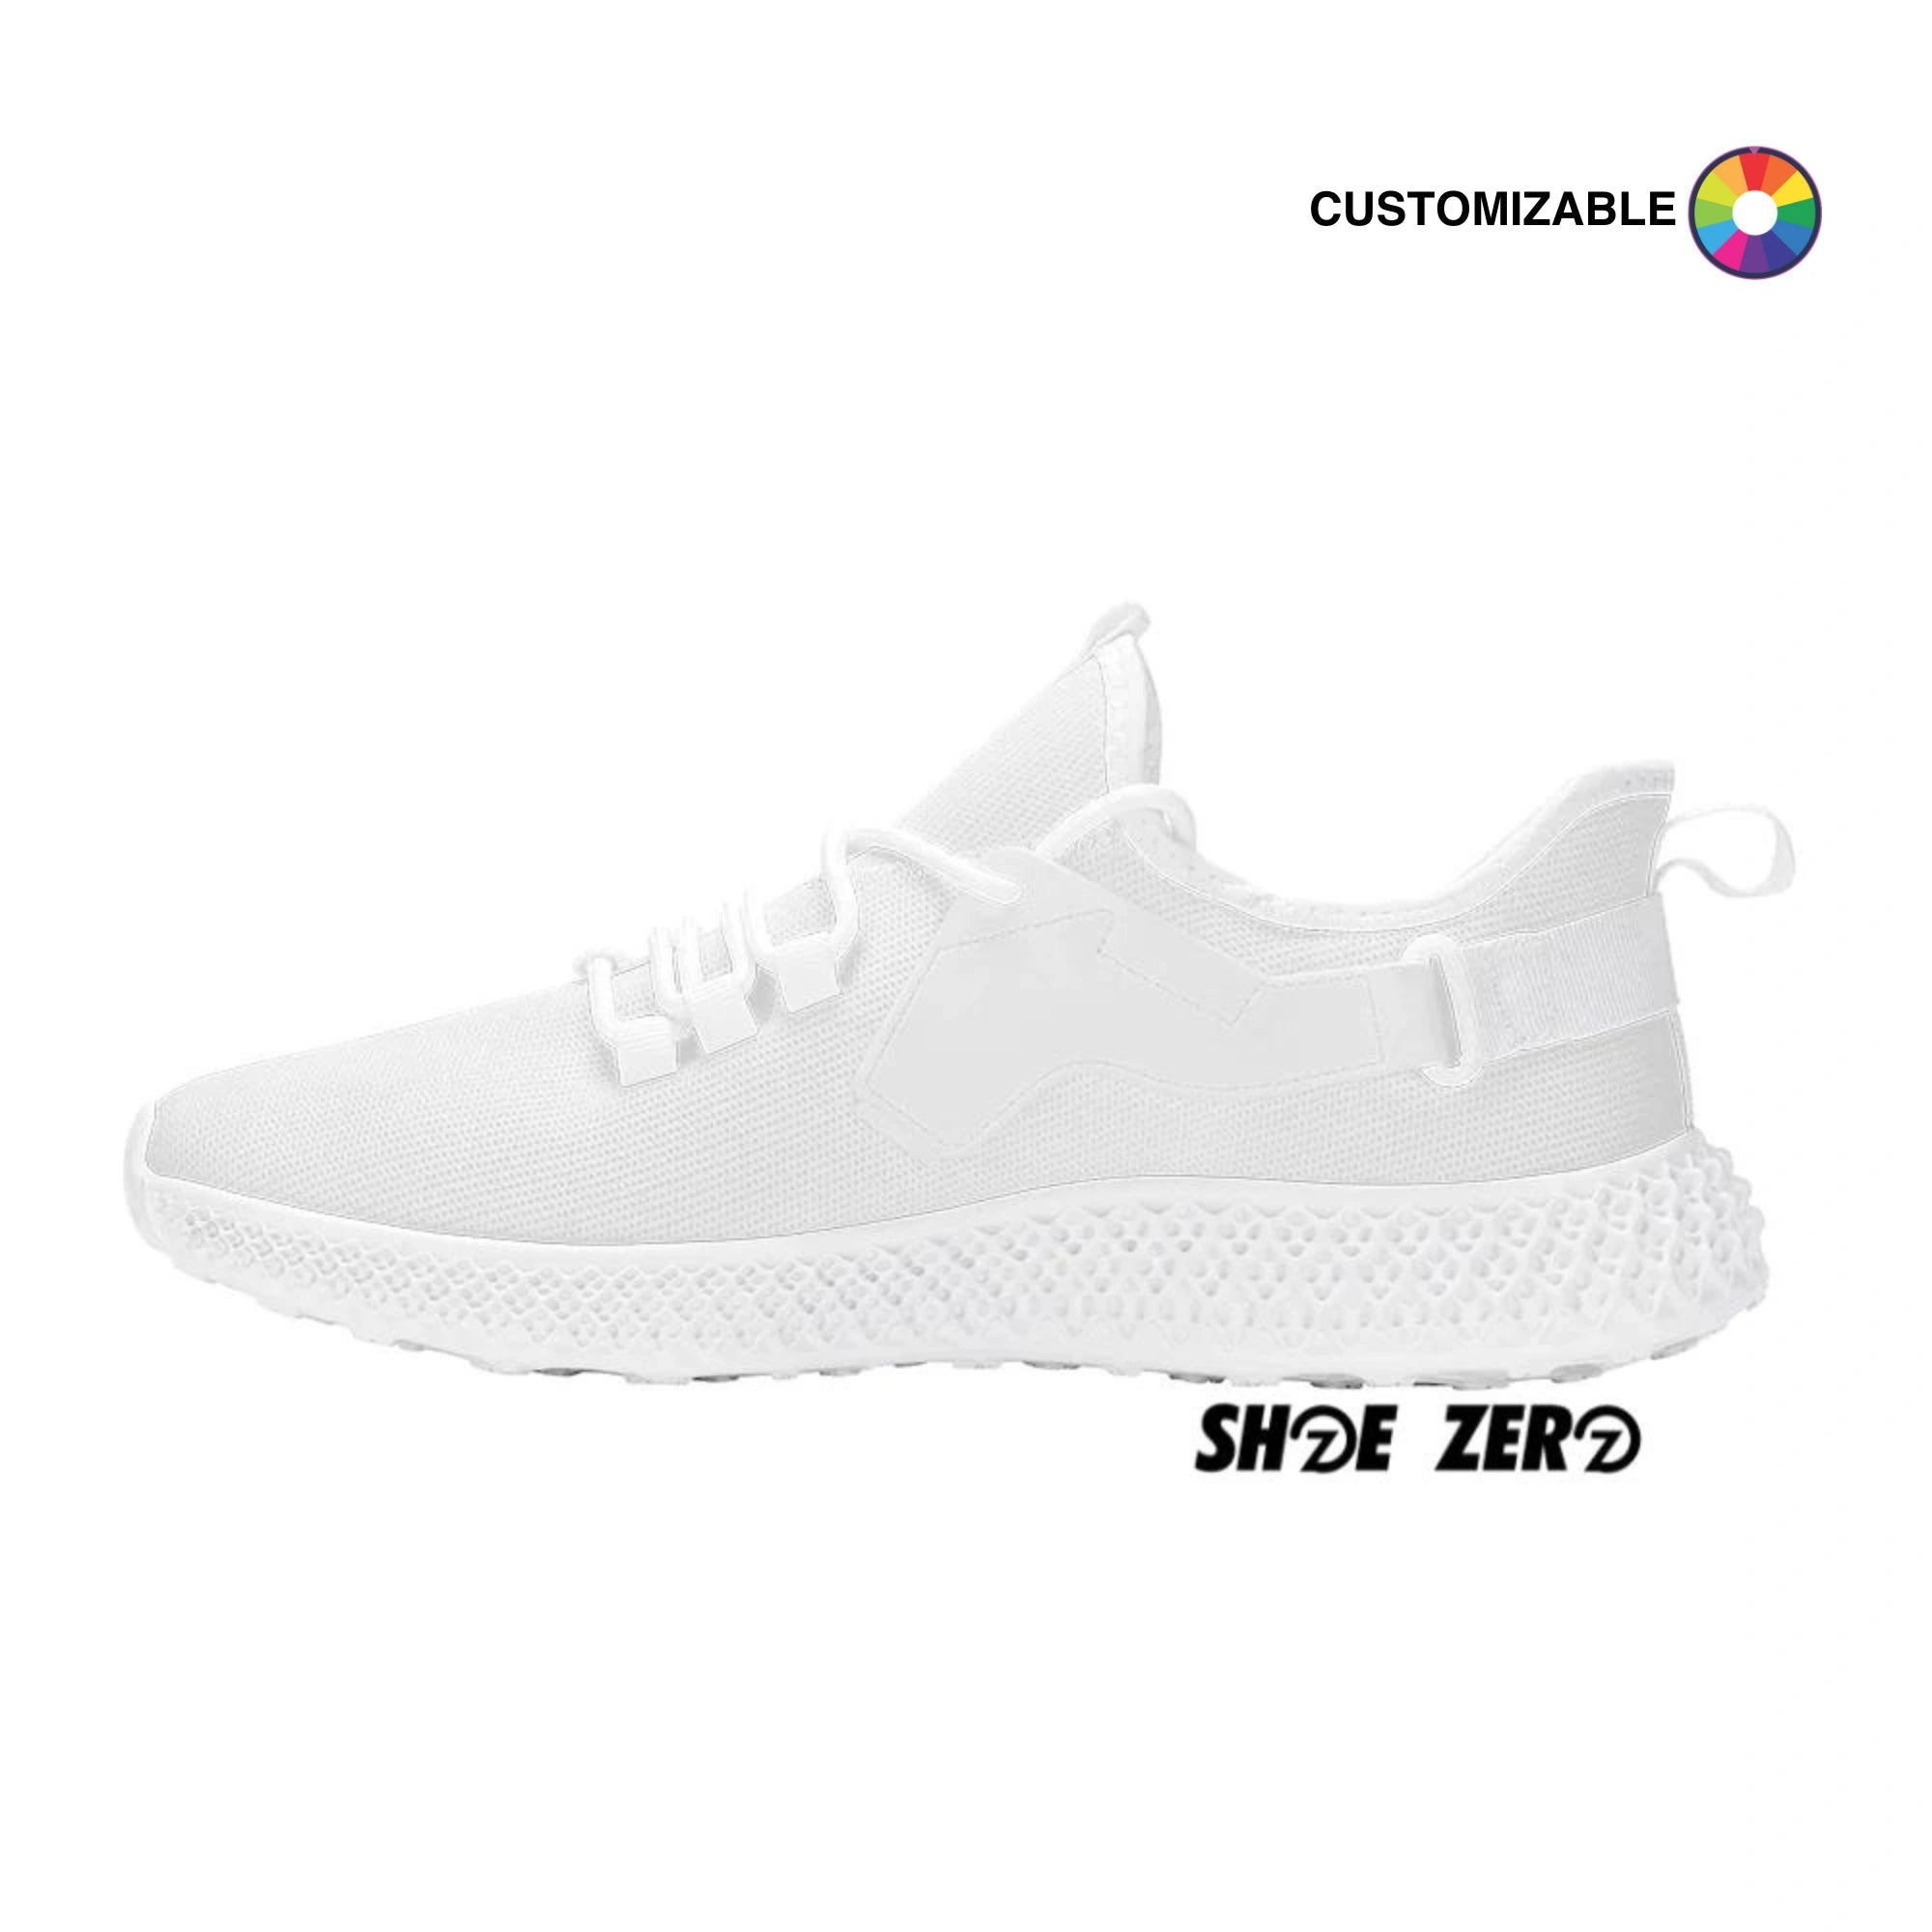 Customizable New Arrival Mesh Knit Shoes